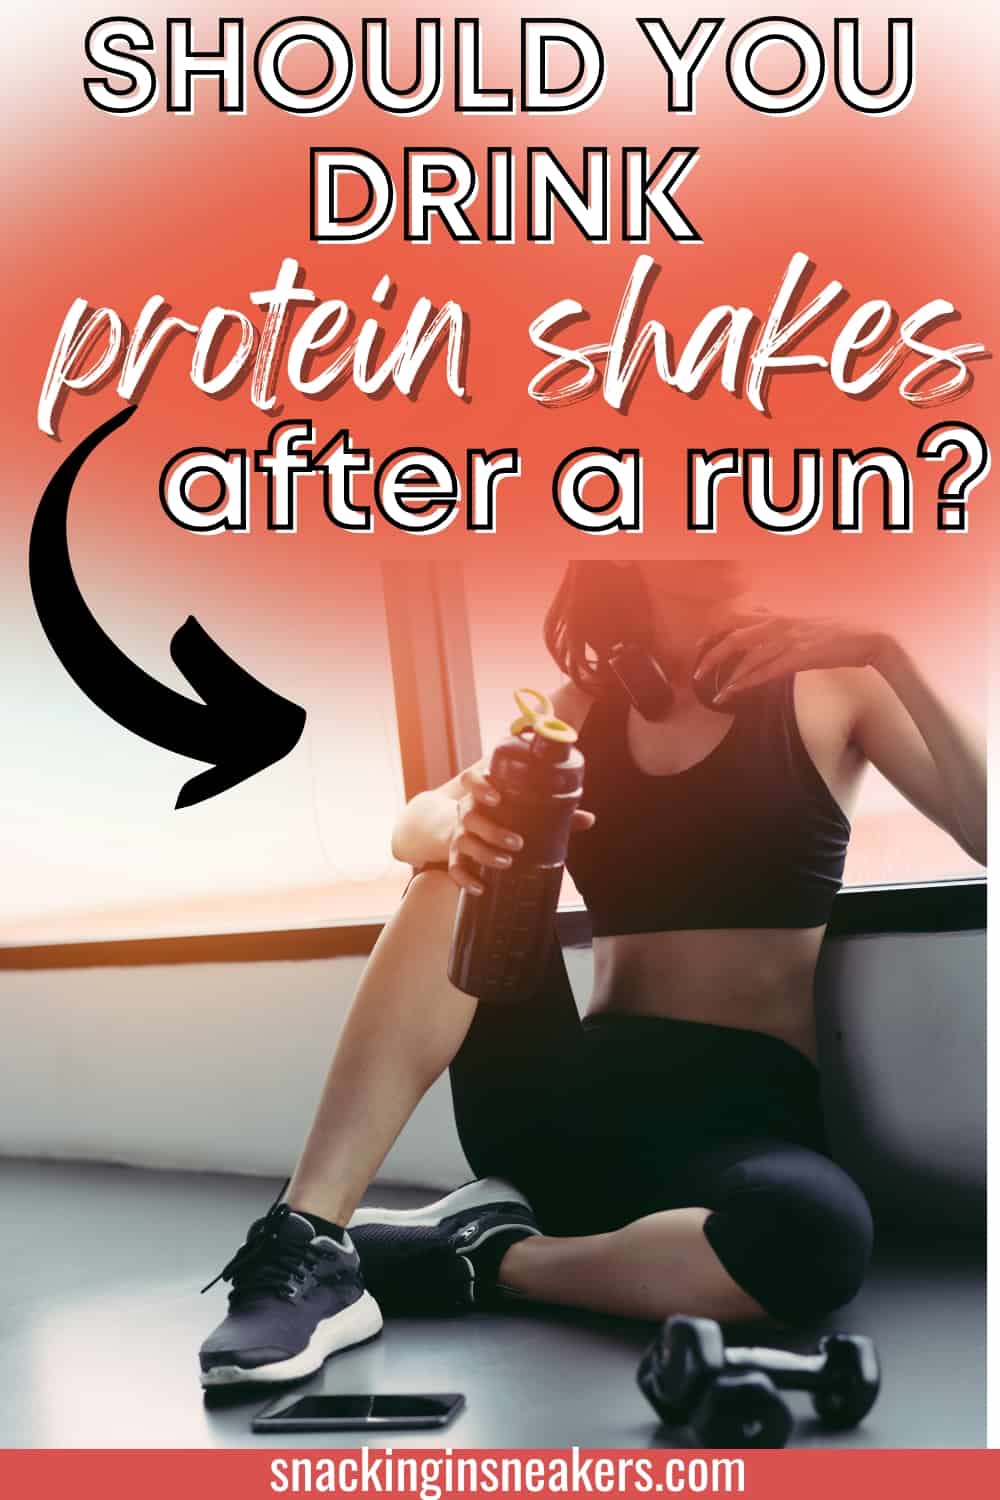 A female runner sitting next to a protein shake, phone, and some dumbbells, with a text overlay that says should you drink protein shakes after a run.